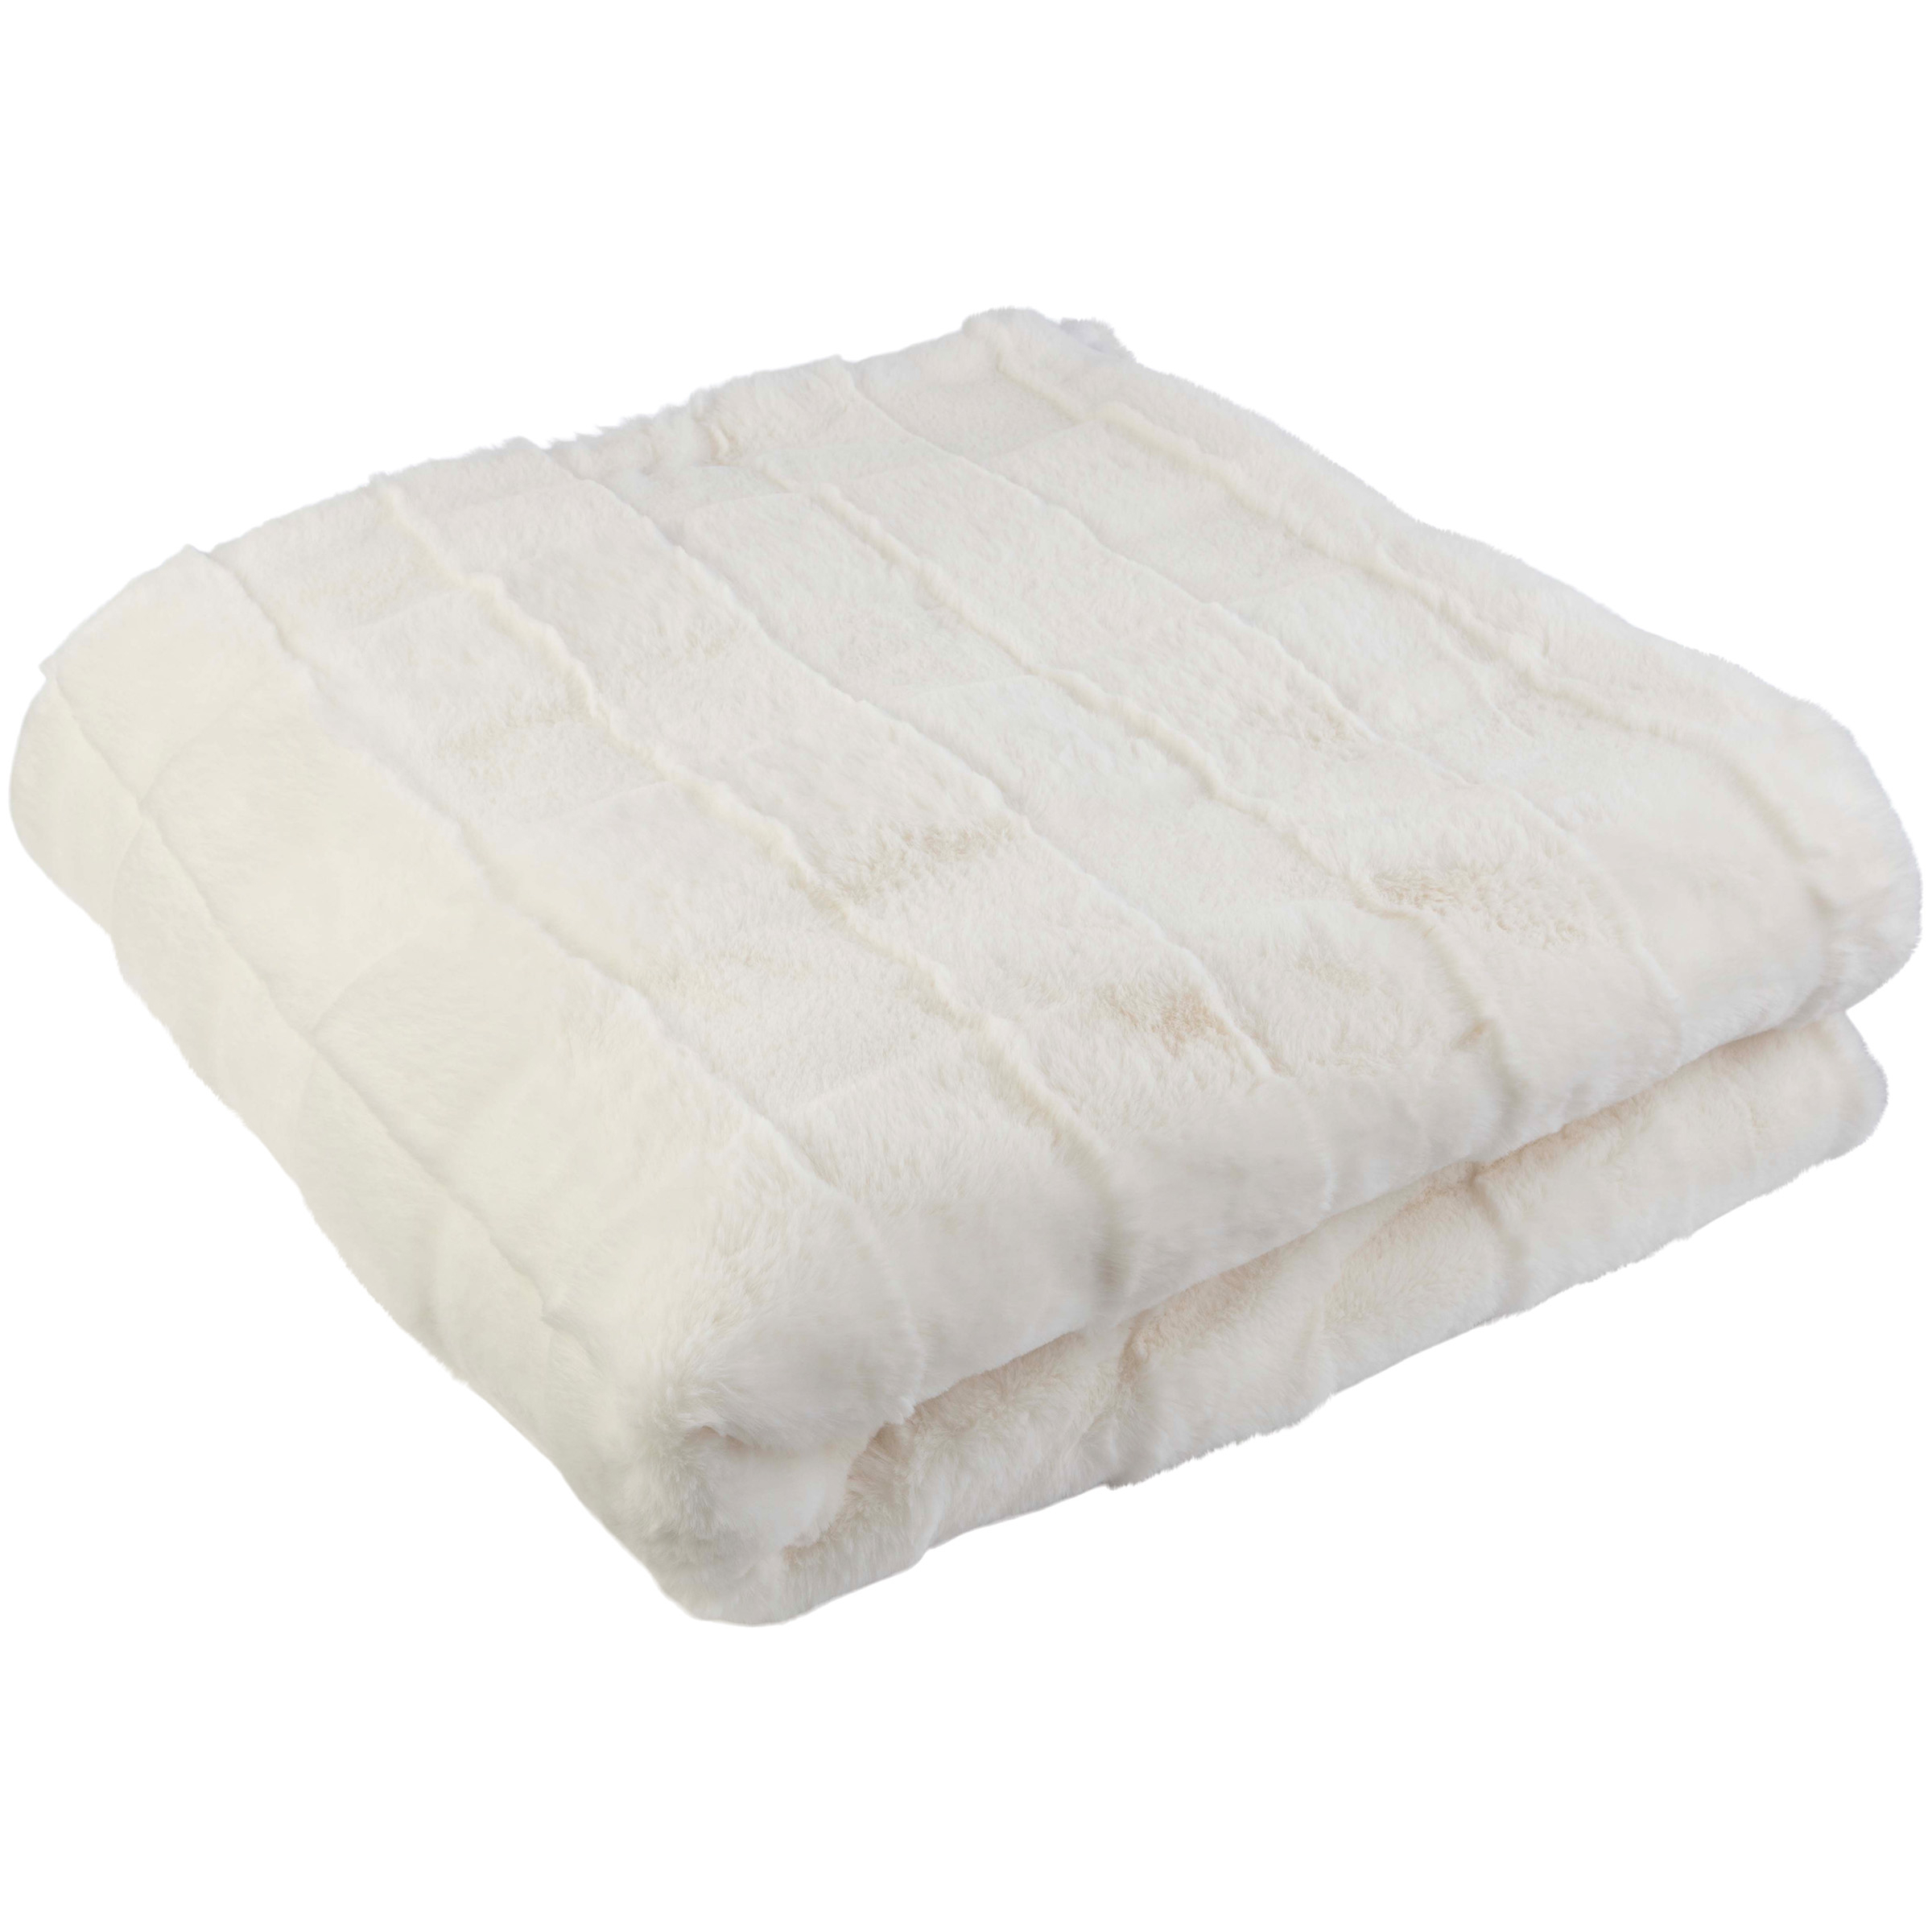 Faux Fur Blanket - 60x80-Inch Queen Size Throw Blanket With Plush Faux Fur Front And Mink Fur Back - Bedding For Sofas And Beds - Cream